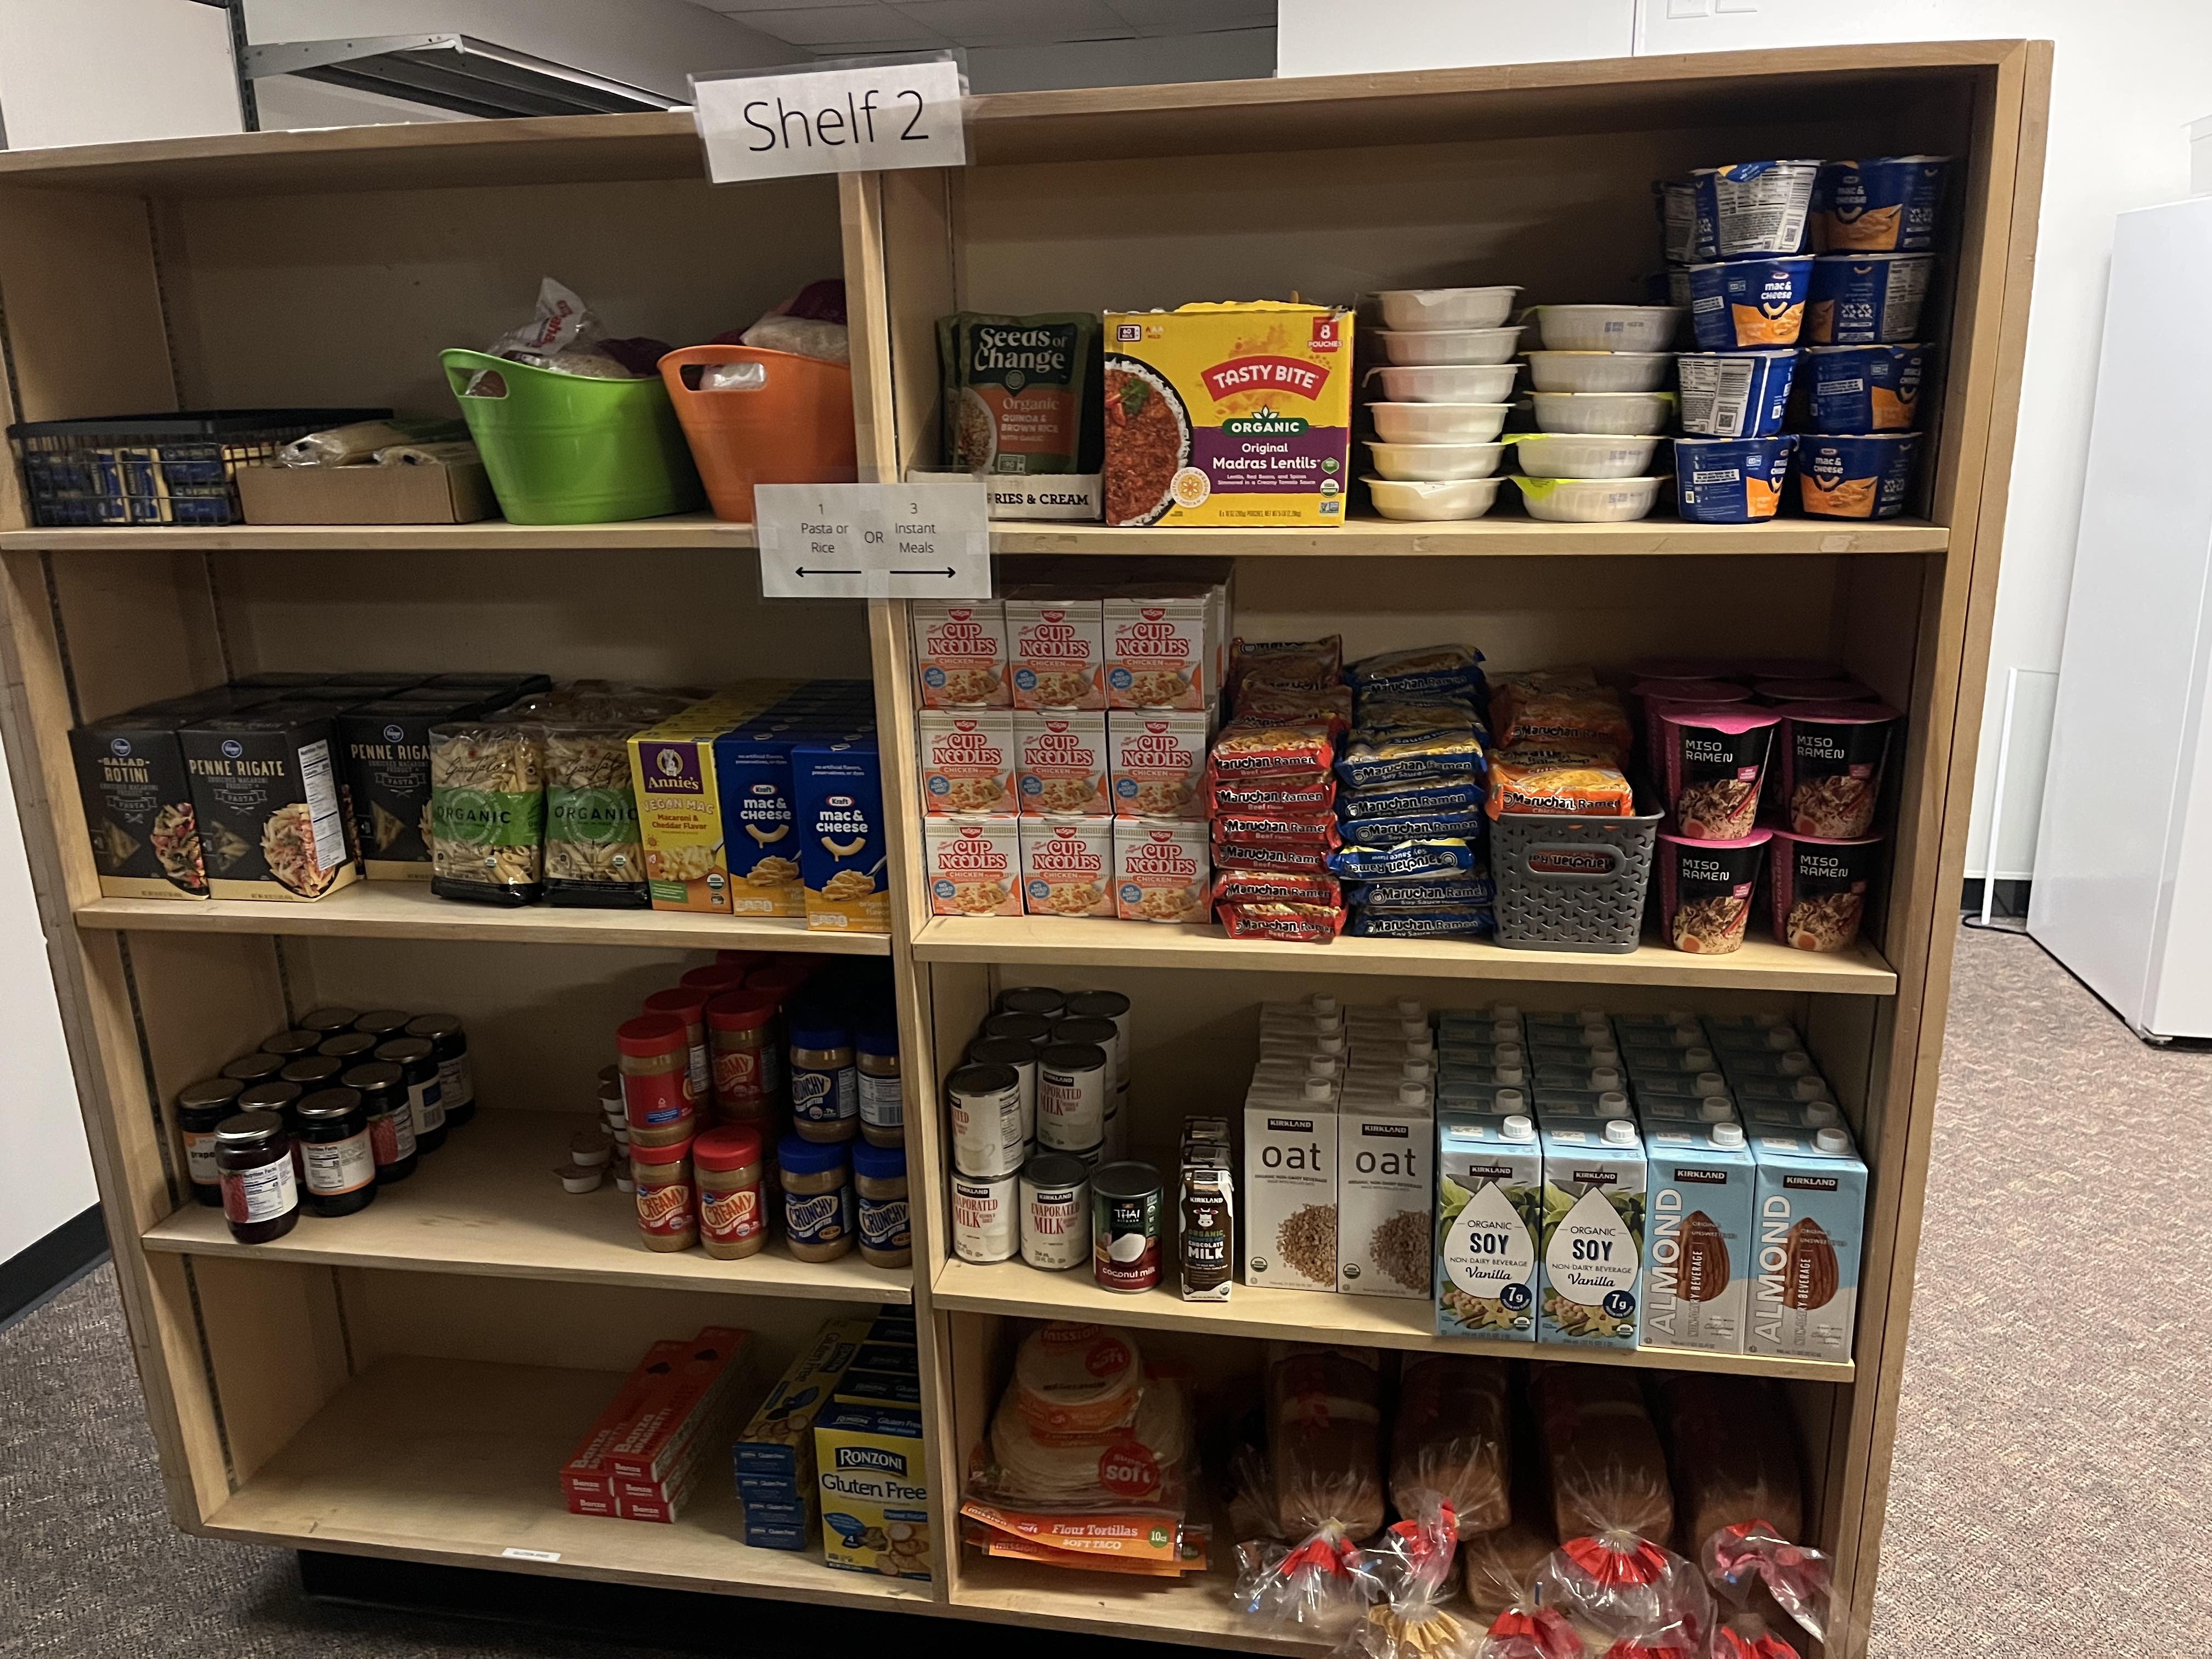 Students on campus are able to anonymously select food items free of charge.